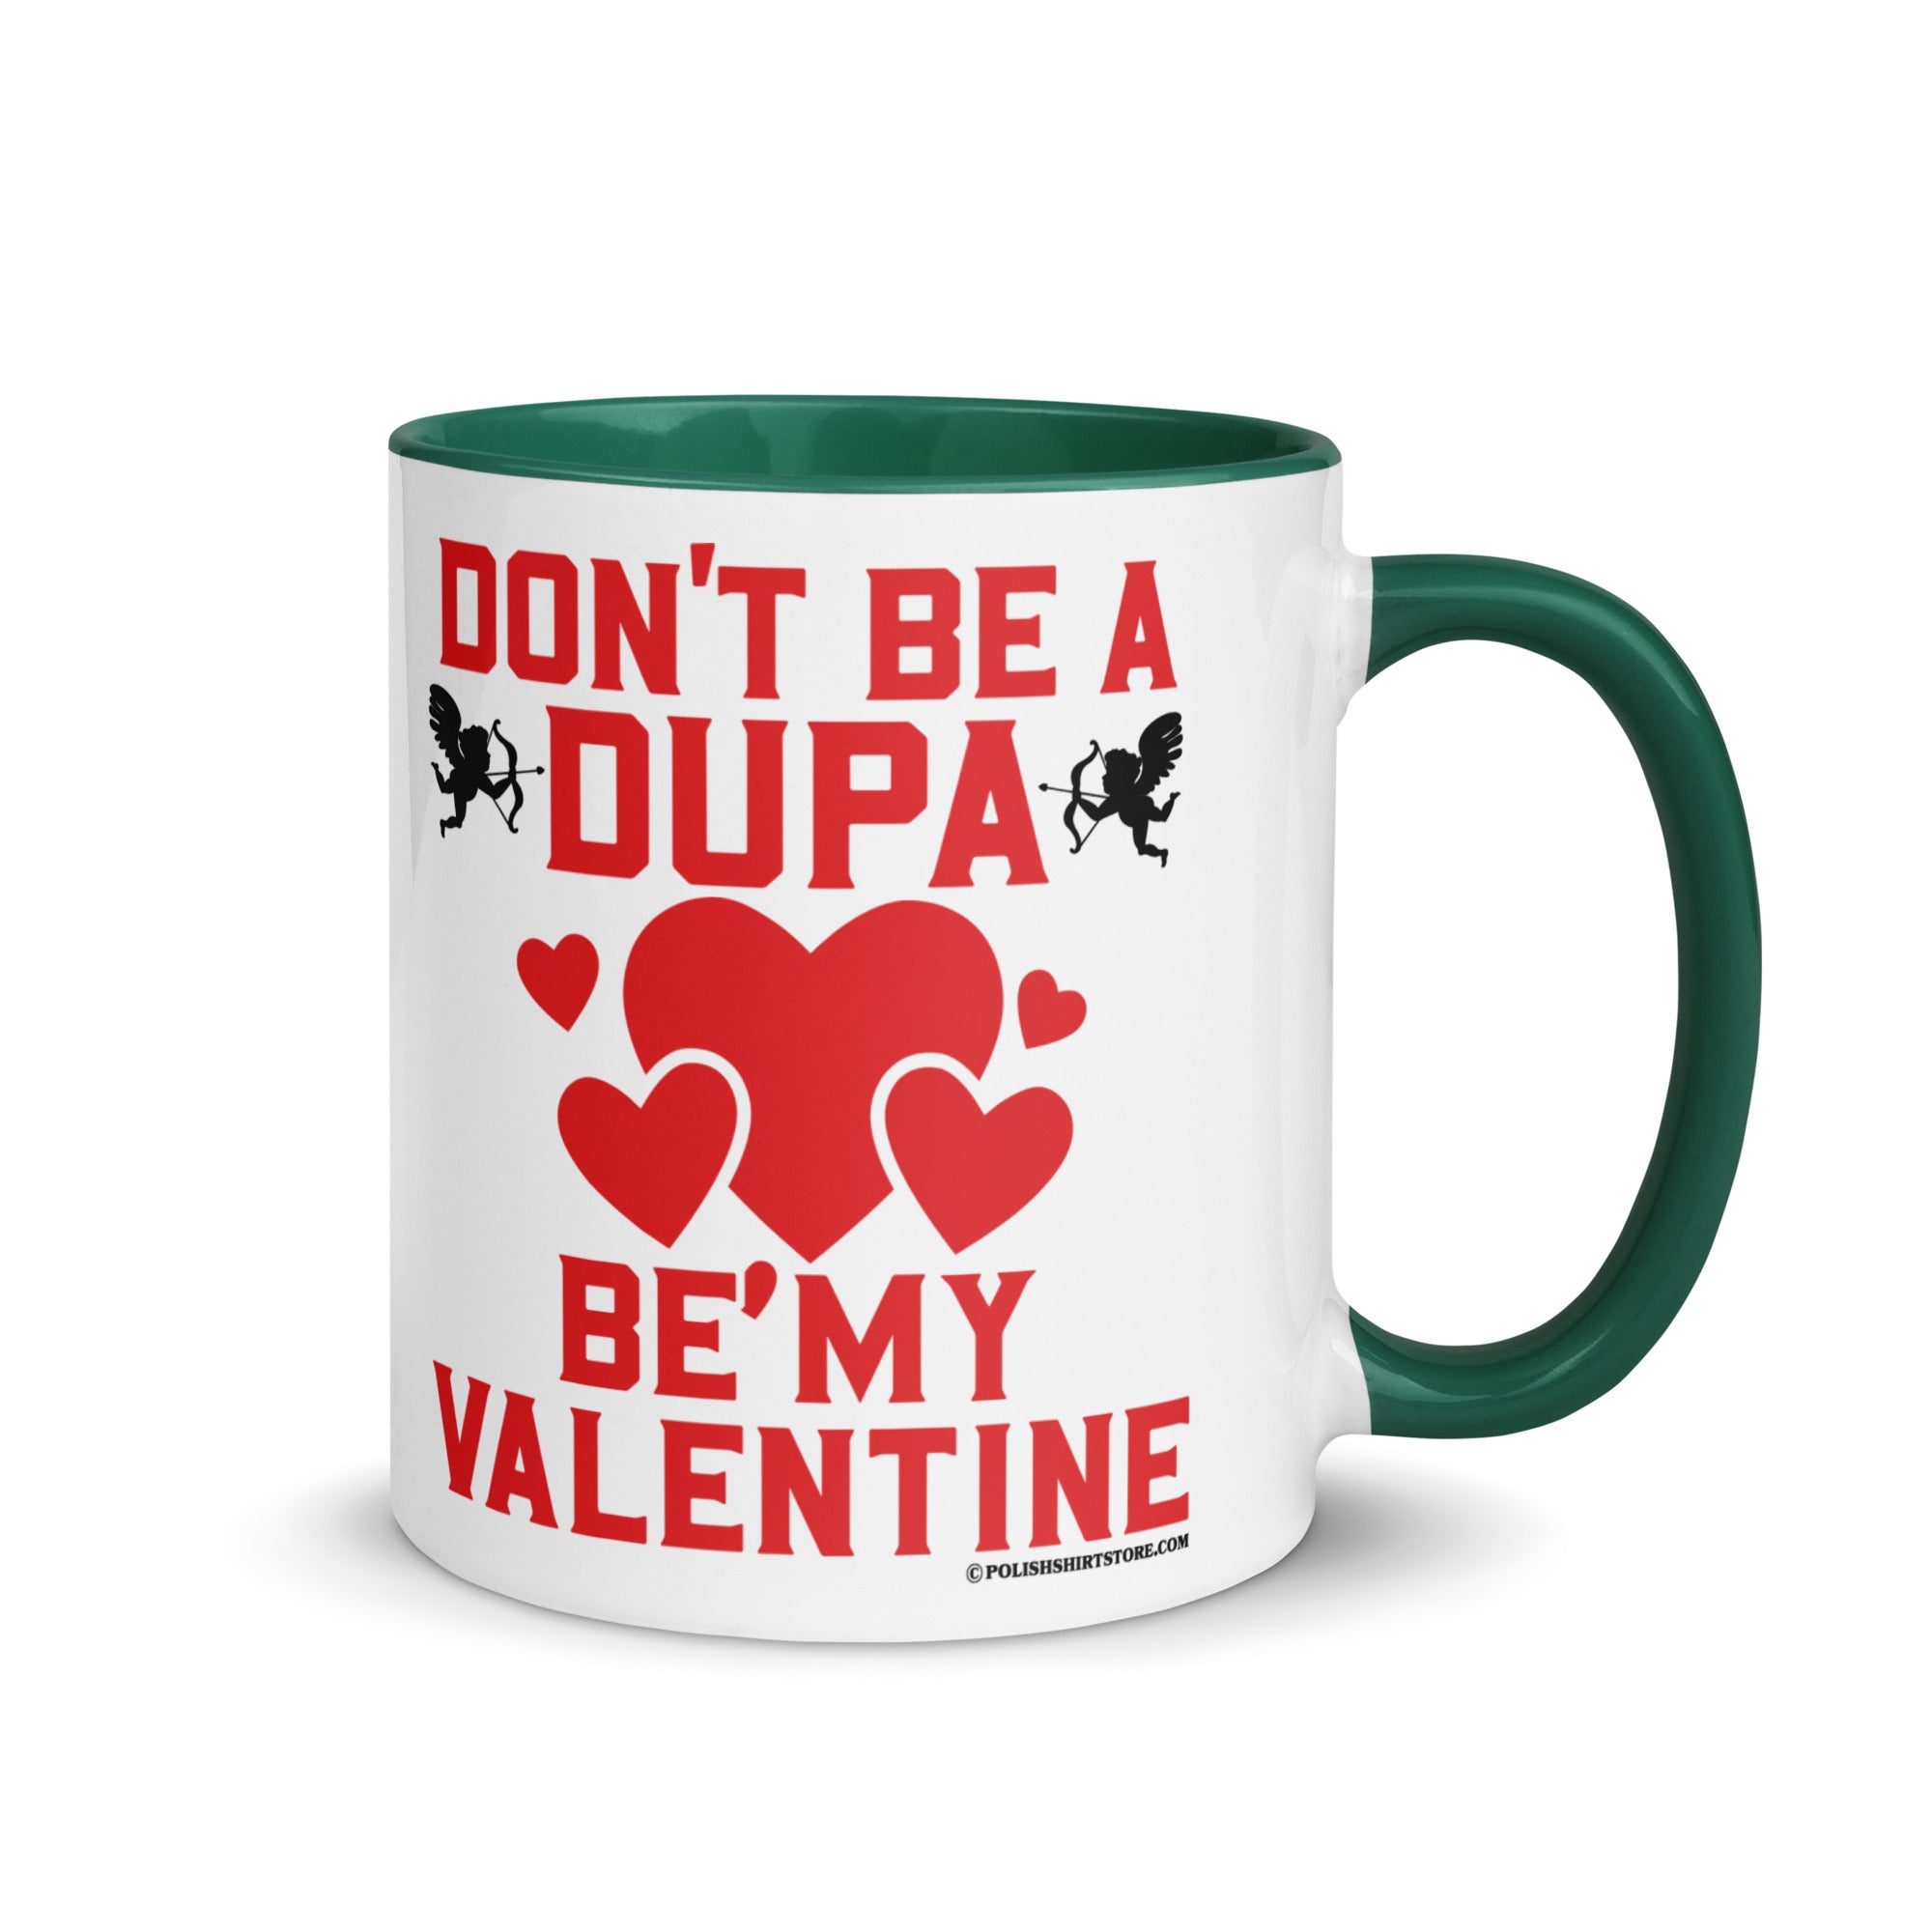 Don't Be A Dupa Be My Valentine Coffee Mug with Color Inside  Polish Shirt Store Dark green 11 oz 